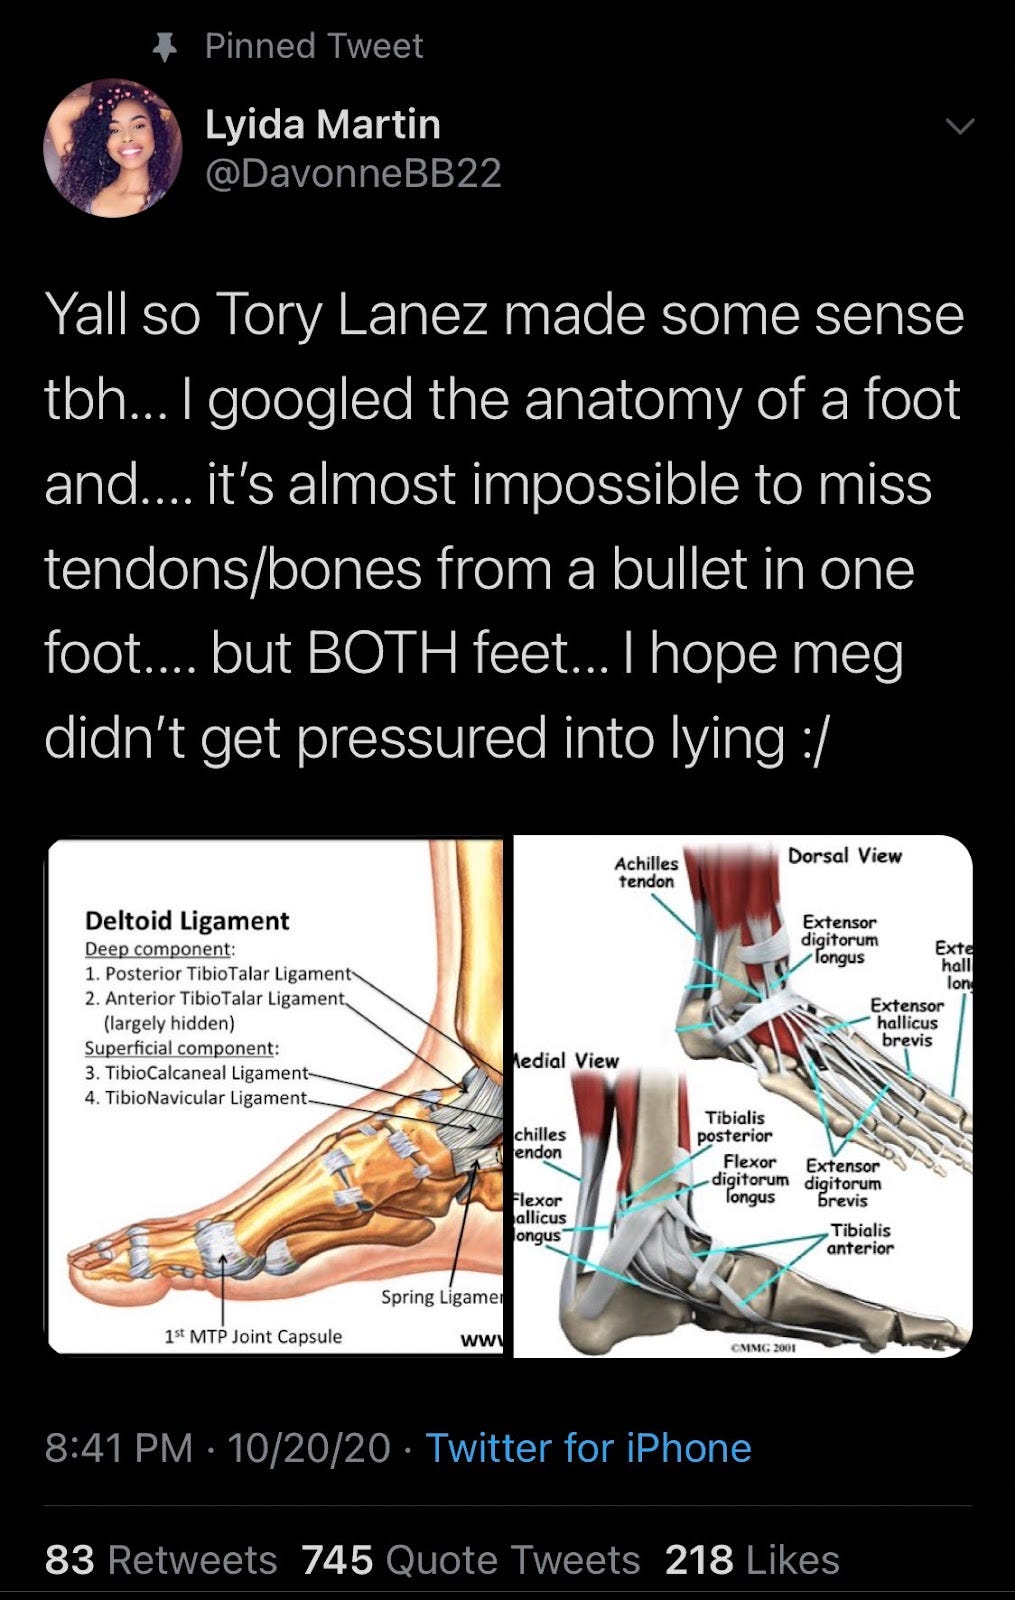 Screenshot of a tweet and two photos of a diagram of the bones in a food. The tweet says “Yall so Troy Lanez made some sense tbh…i googled the anatomy of a foot and… it’s almost impossible to miss tendons/bones from a bullet in one foot..but BOTH feet..I hope meg didn’t get pressured into lying ;/ “